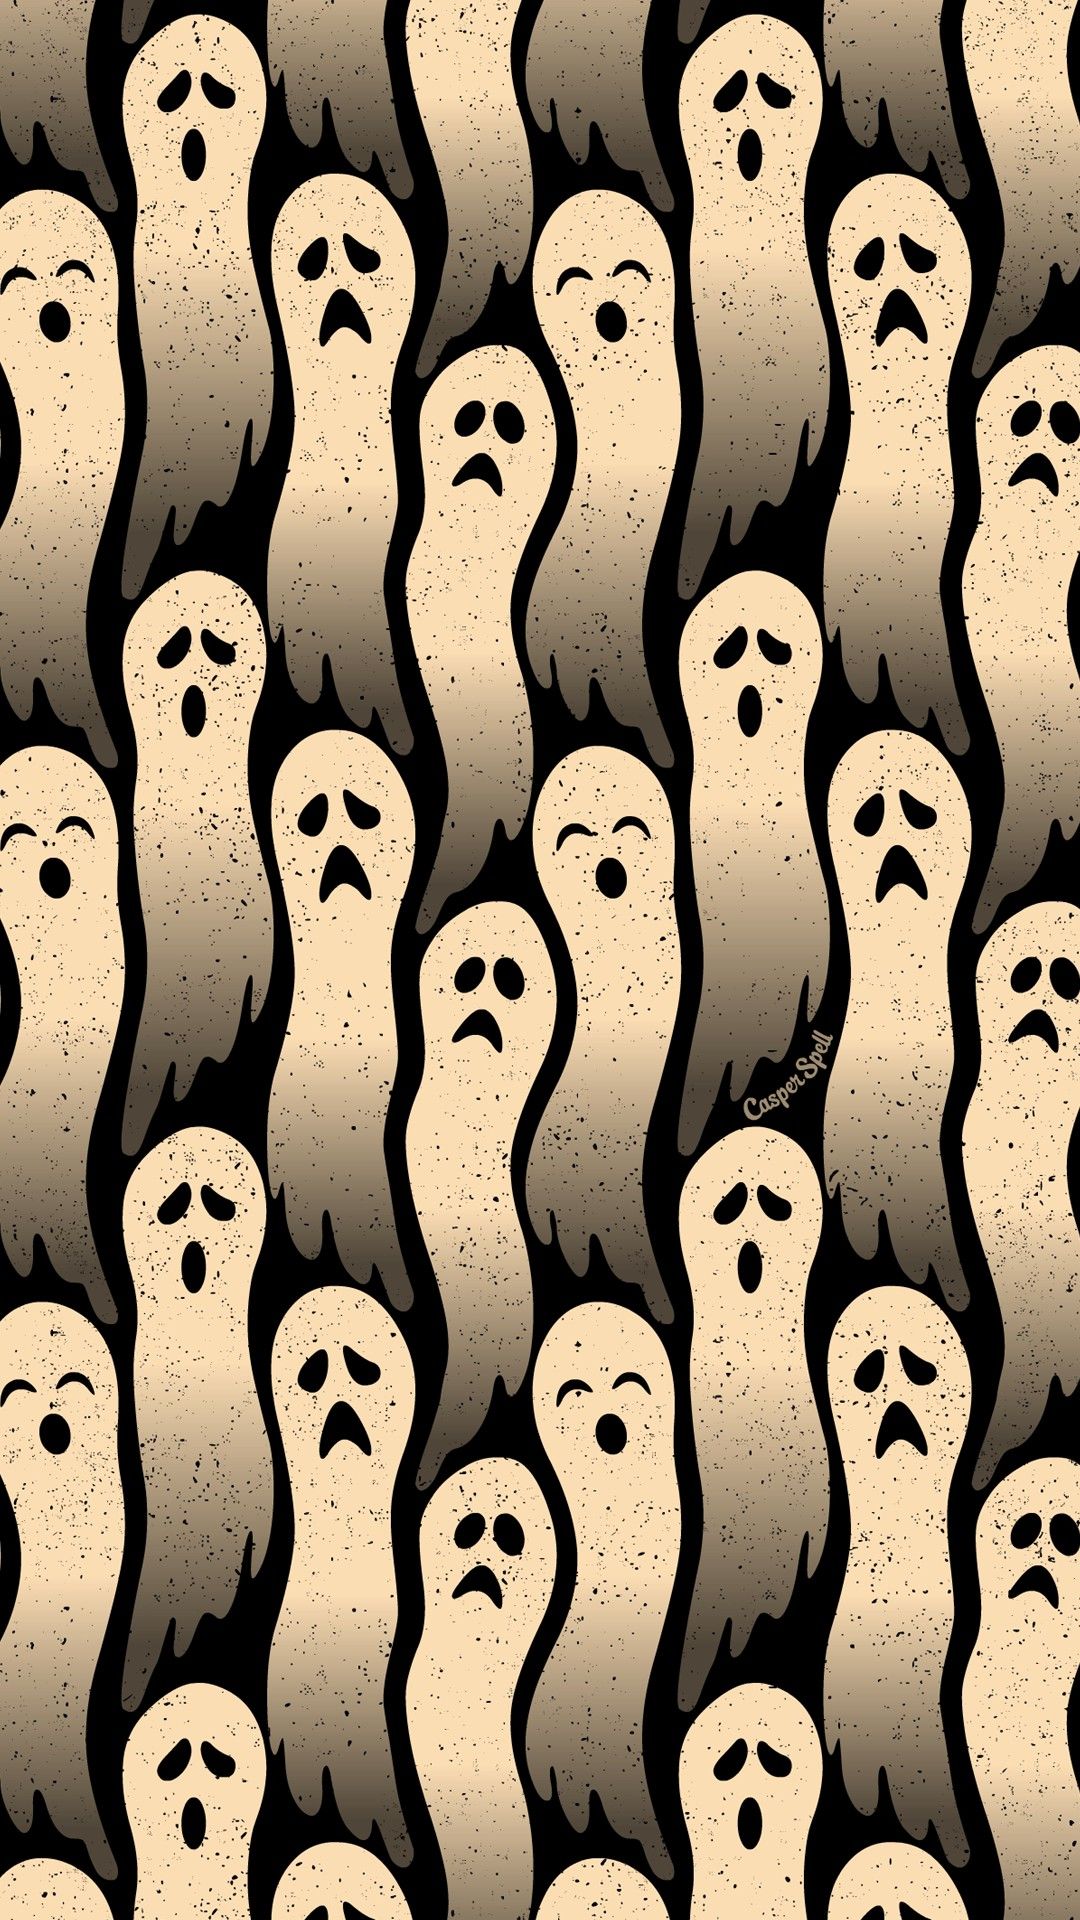 Ghosts repeat pattern Halloween background wallpaper patterns background wallpaper spirits ethereal spooky cu. Halloween art, Art wallpaper, Halloween wallpaper